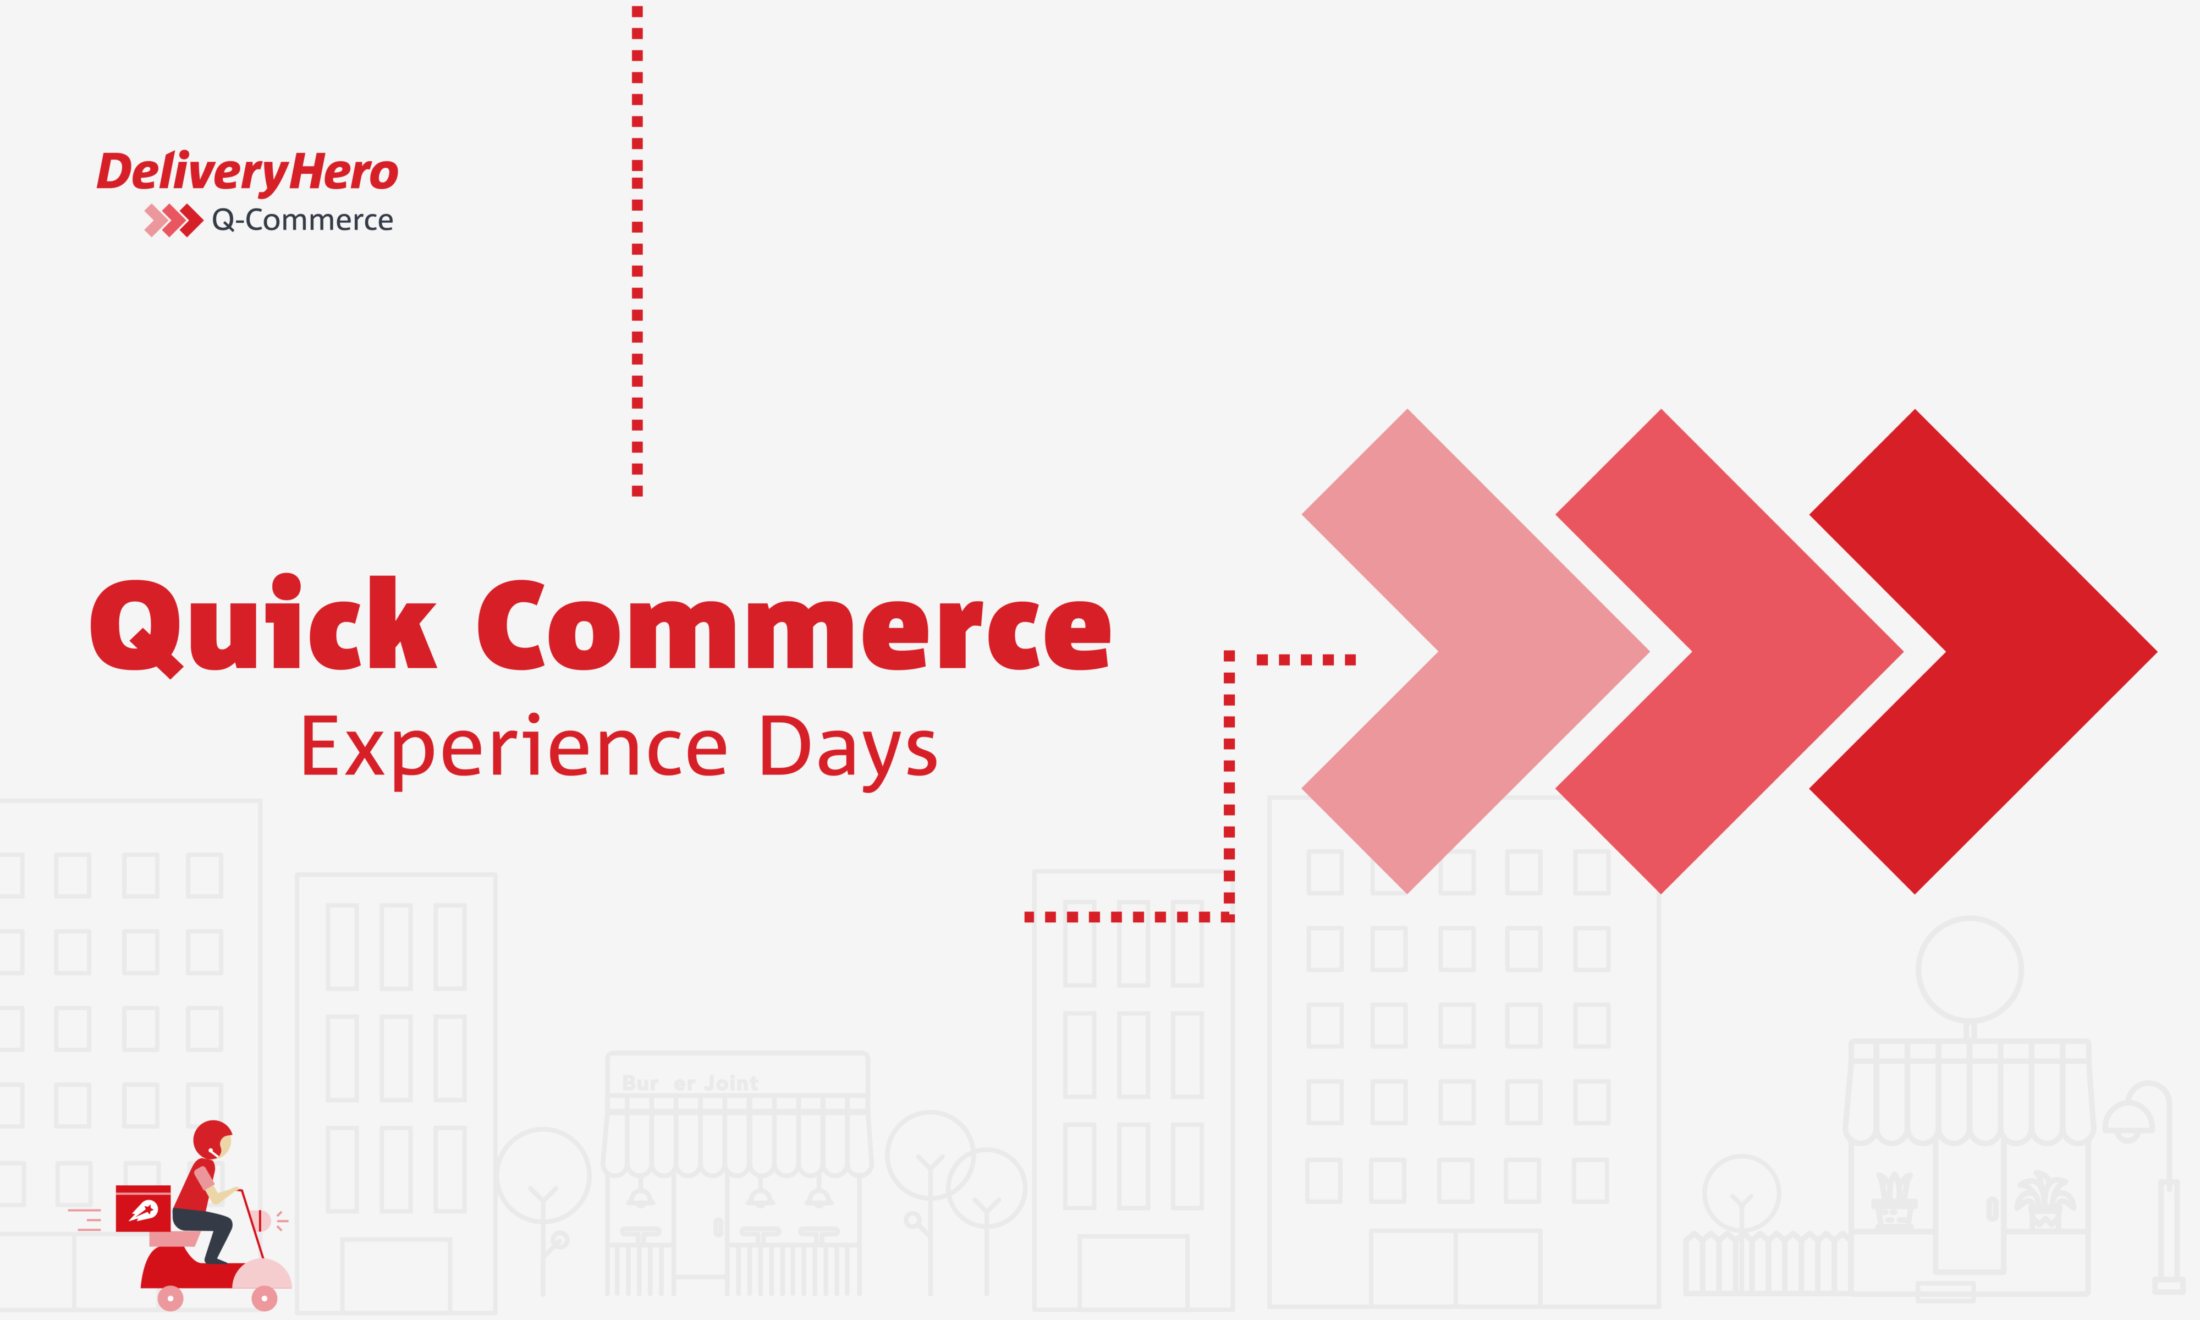 Quick Commerce Experience Days: a wrap-up